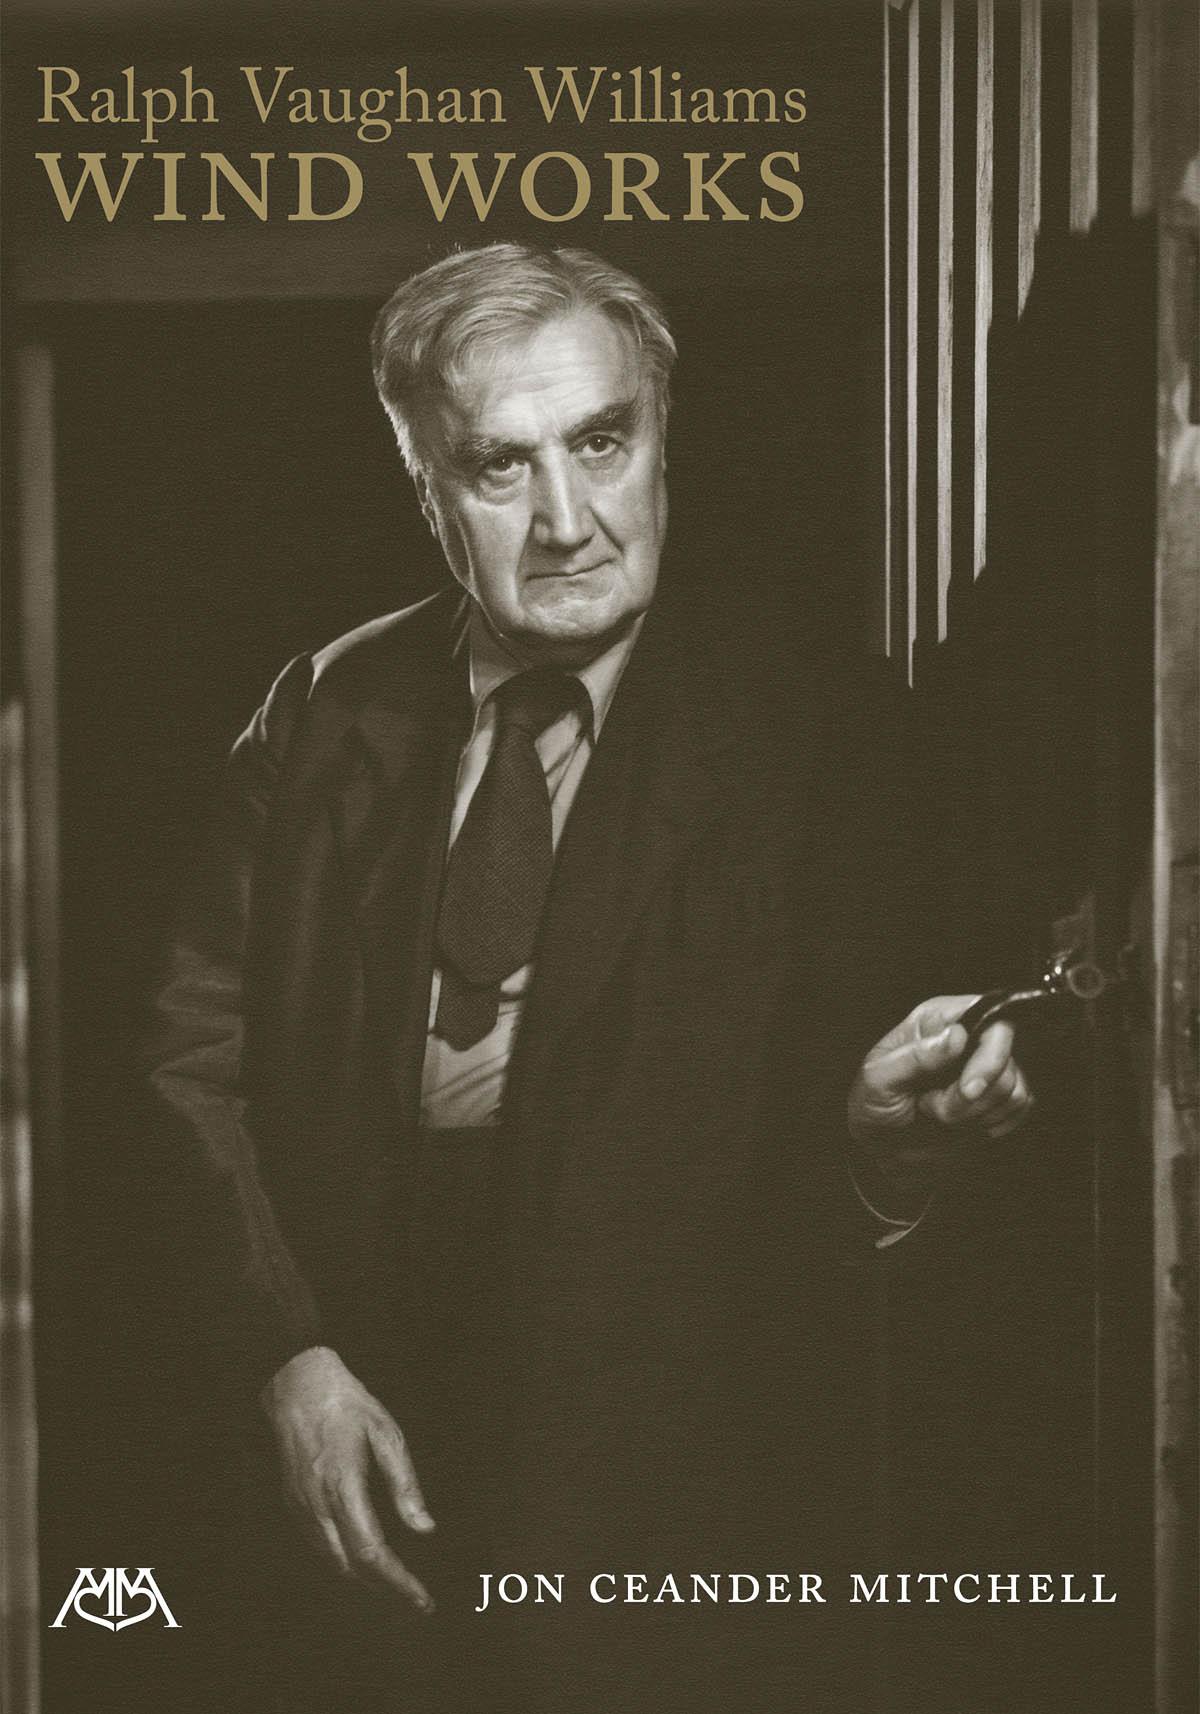 Ralph Vaughan Williams: Ralph Vaughan Williams' Wind Works: Reference Books: